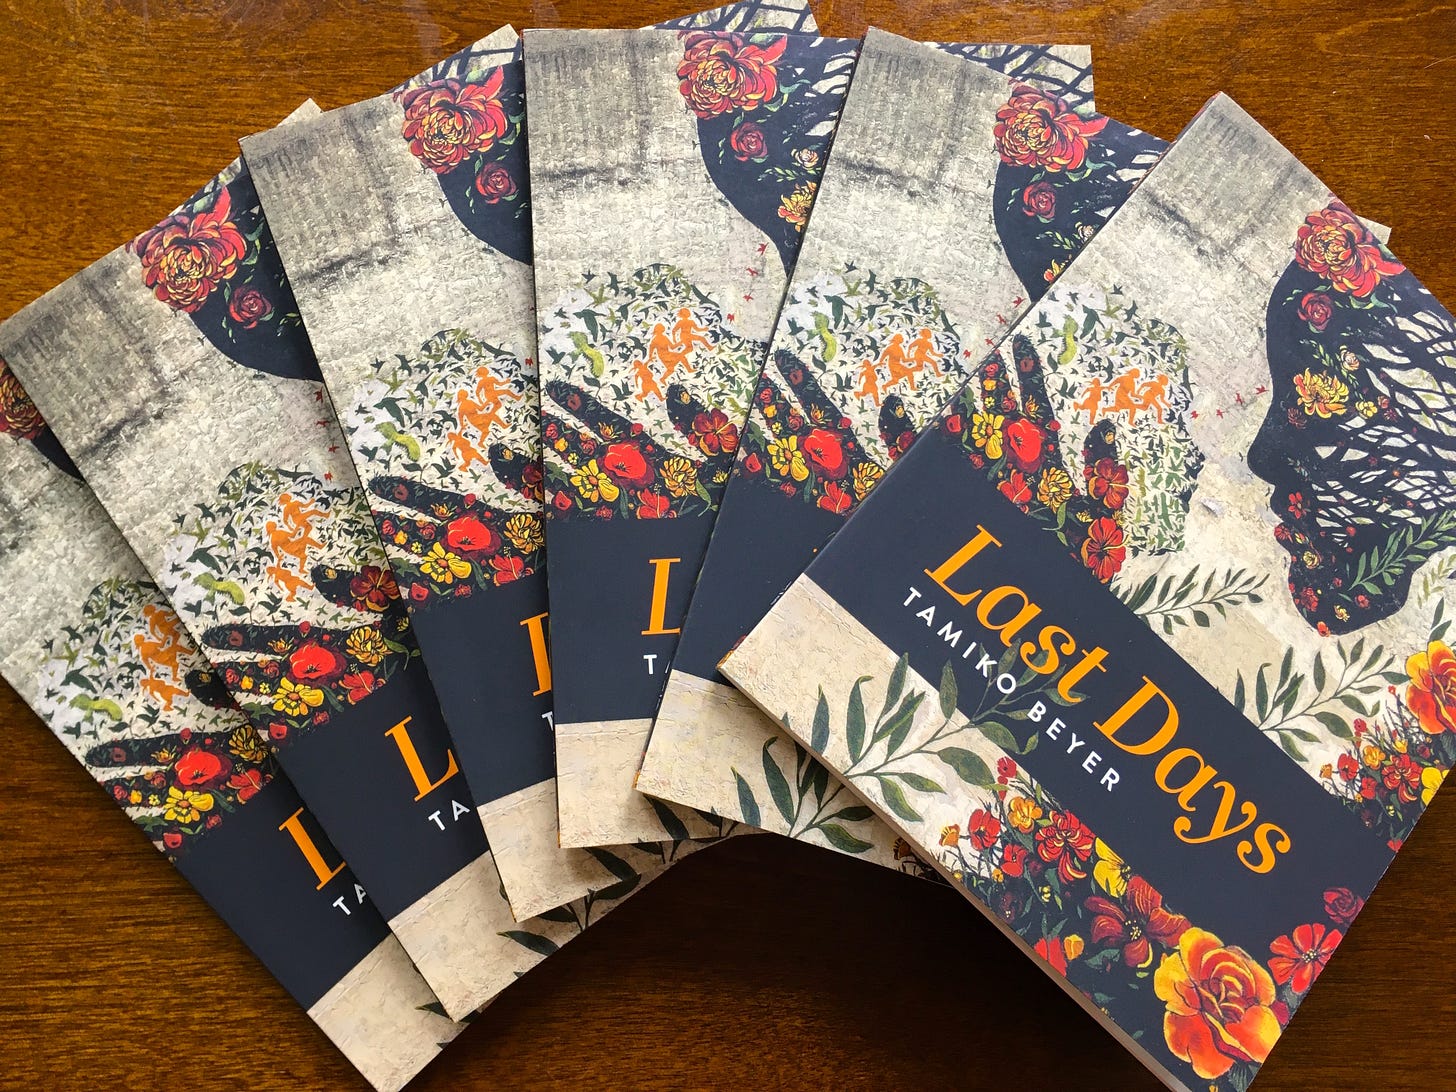 Five copies of Last Days, fanned out on a wooden table. The cover features two faces looking at each other. The faces are composed of branches, flowers, human figures, and birds. Text: Last Days, Tamiko Beyer